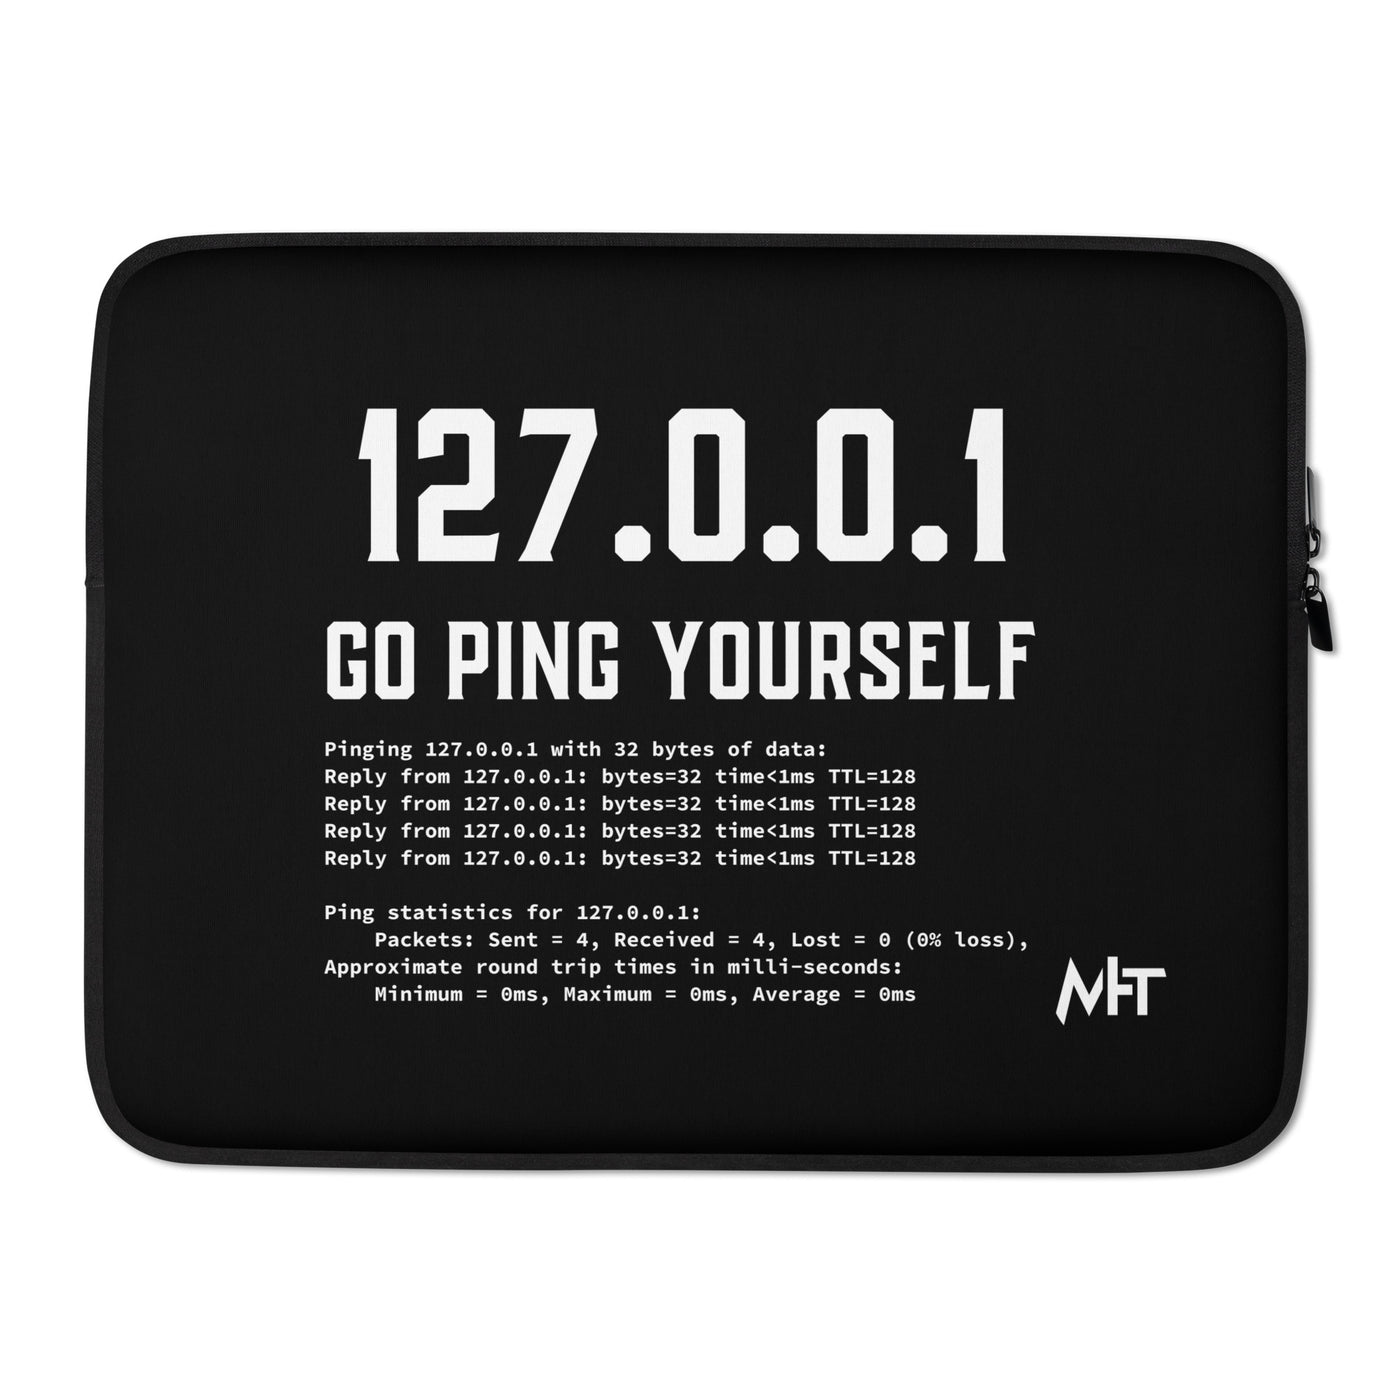 Go ping yourself - Laptop Sleeve